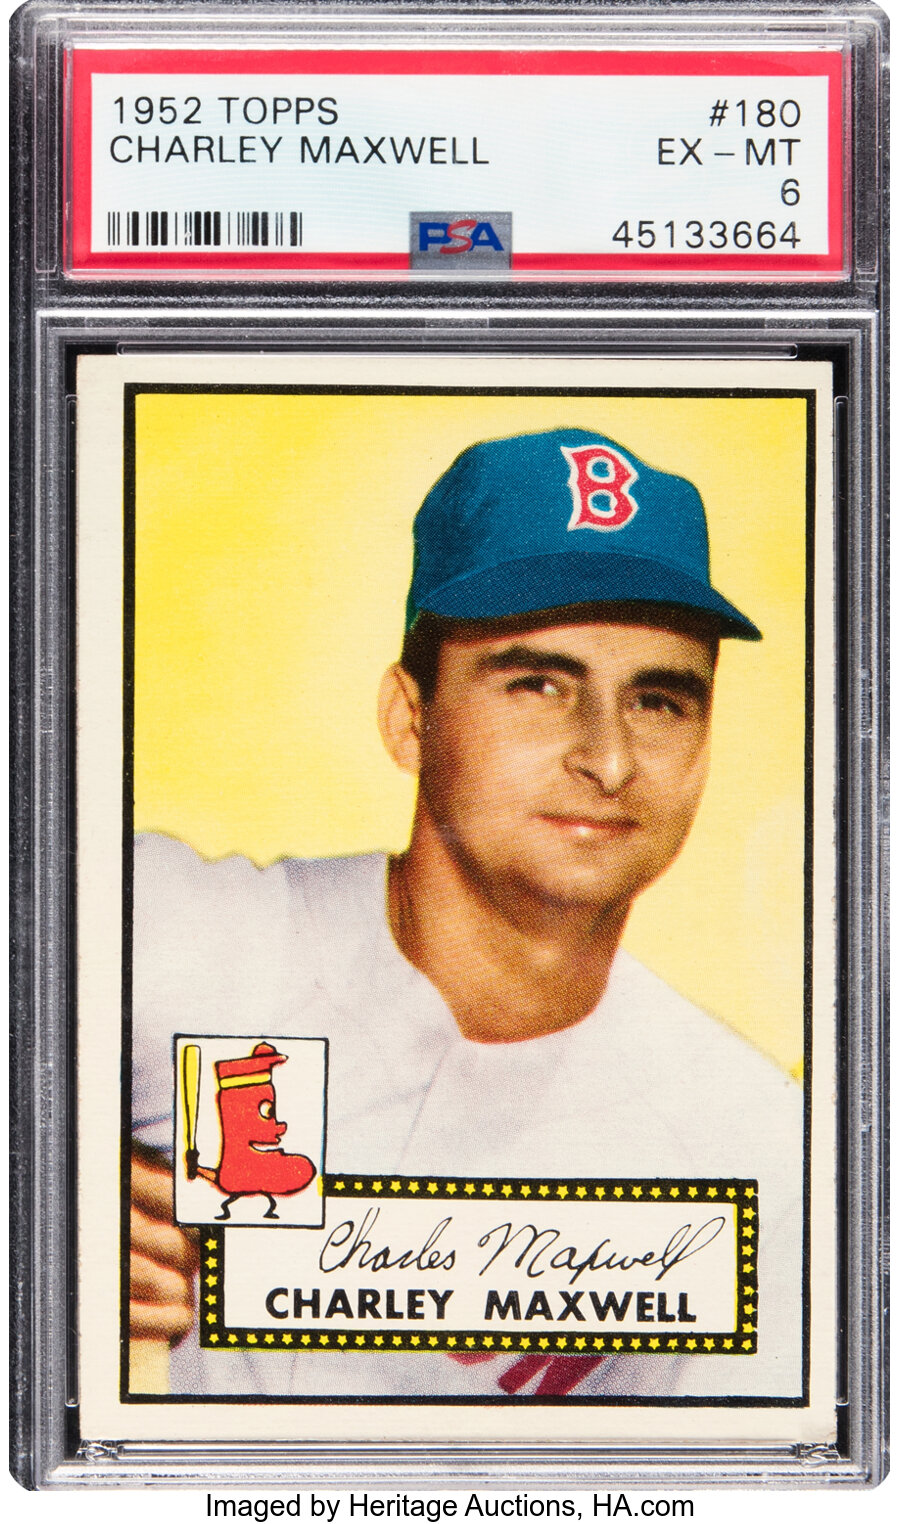 1952 Topps Charley Maxwell Rookie #180 PSA EX-MT 6